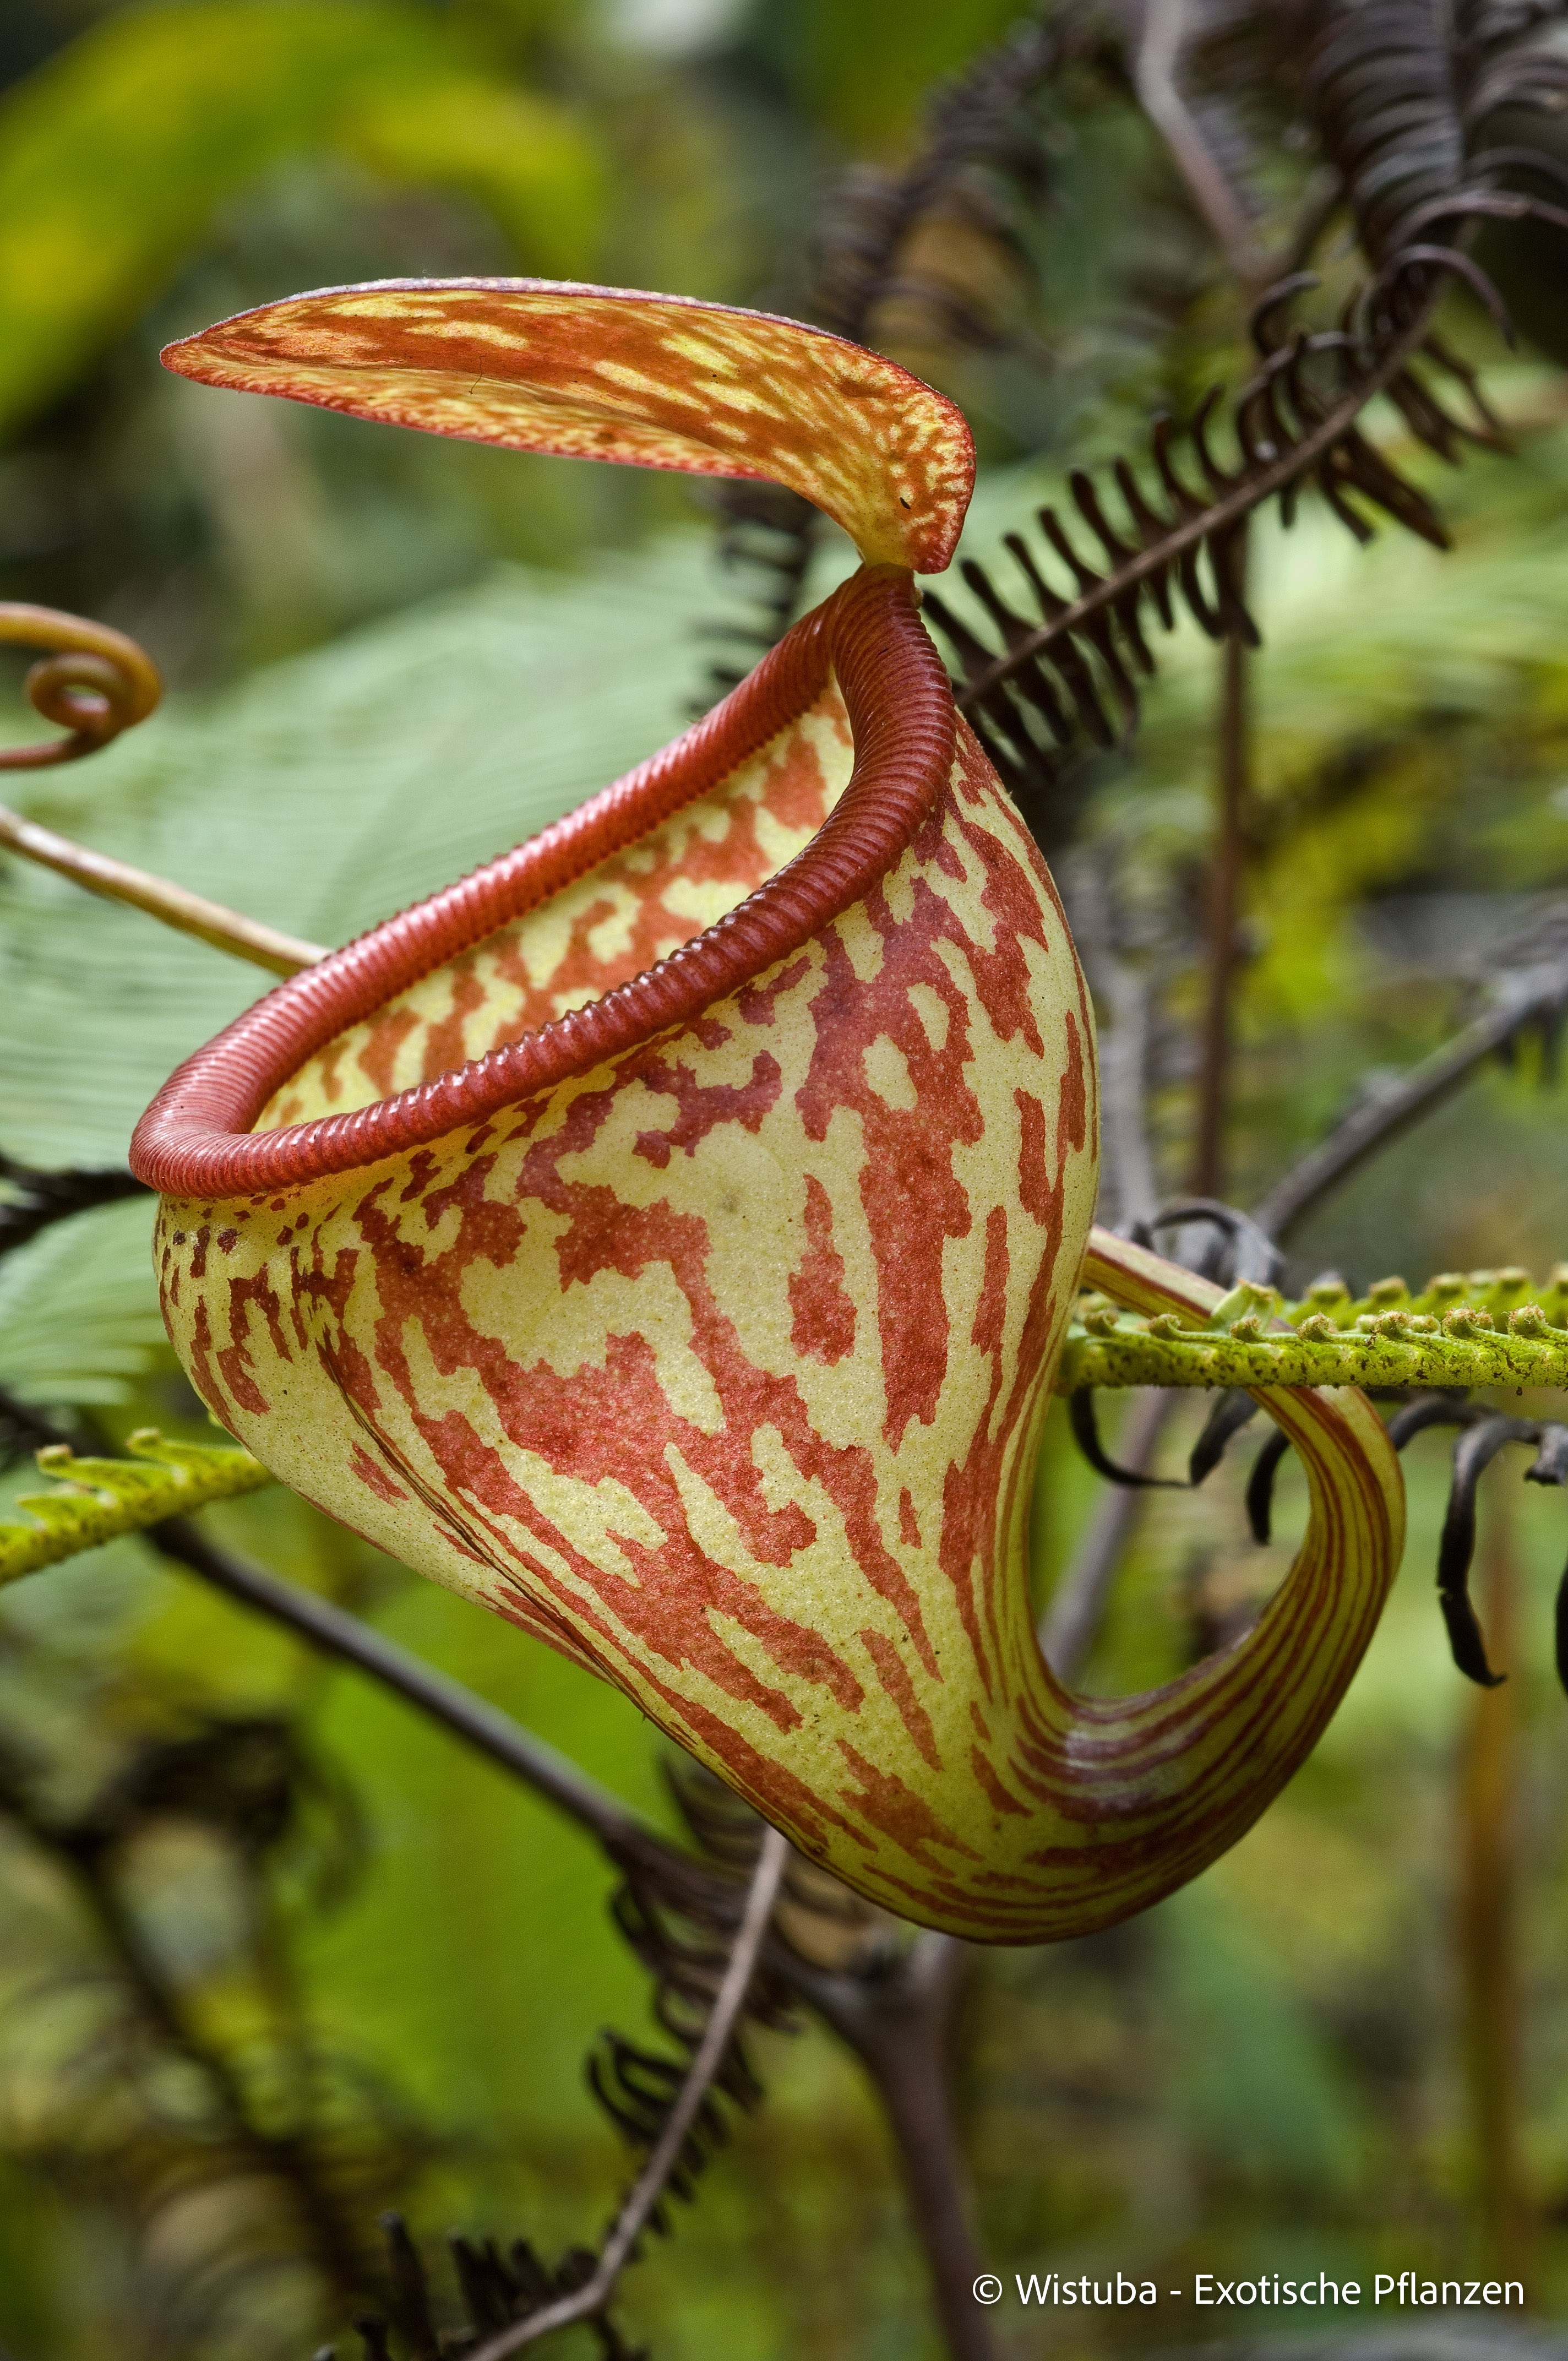 Nepenthes pitopangii ("Speckled form")